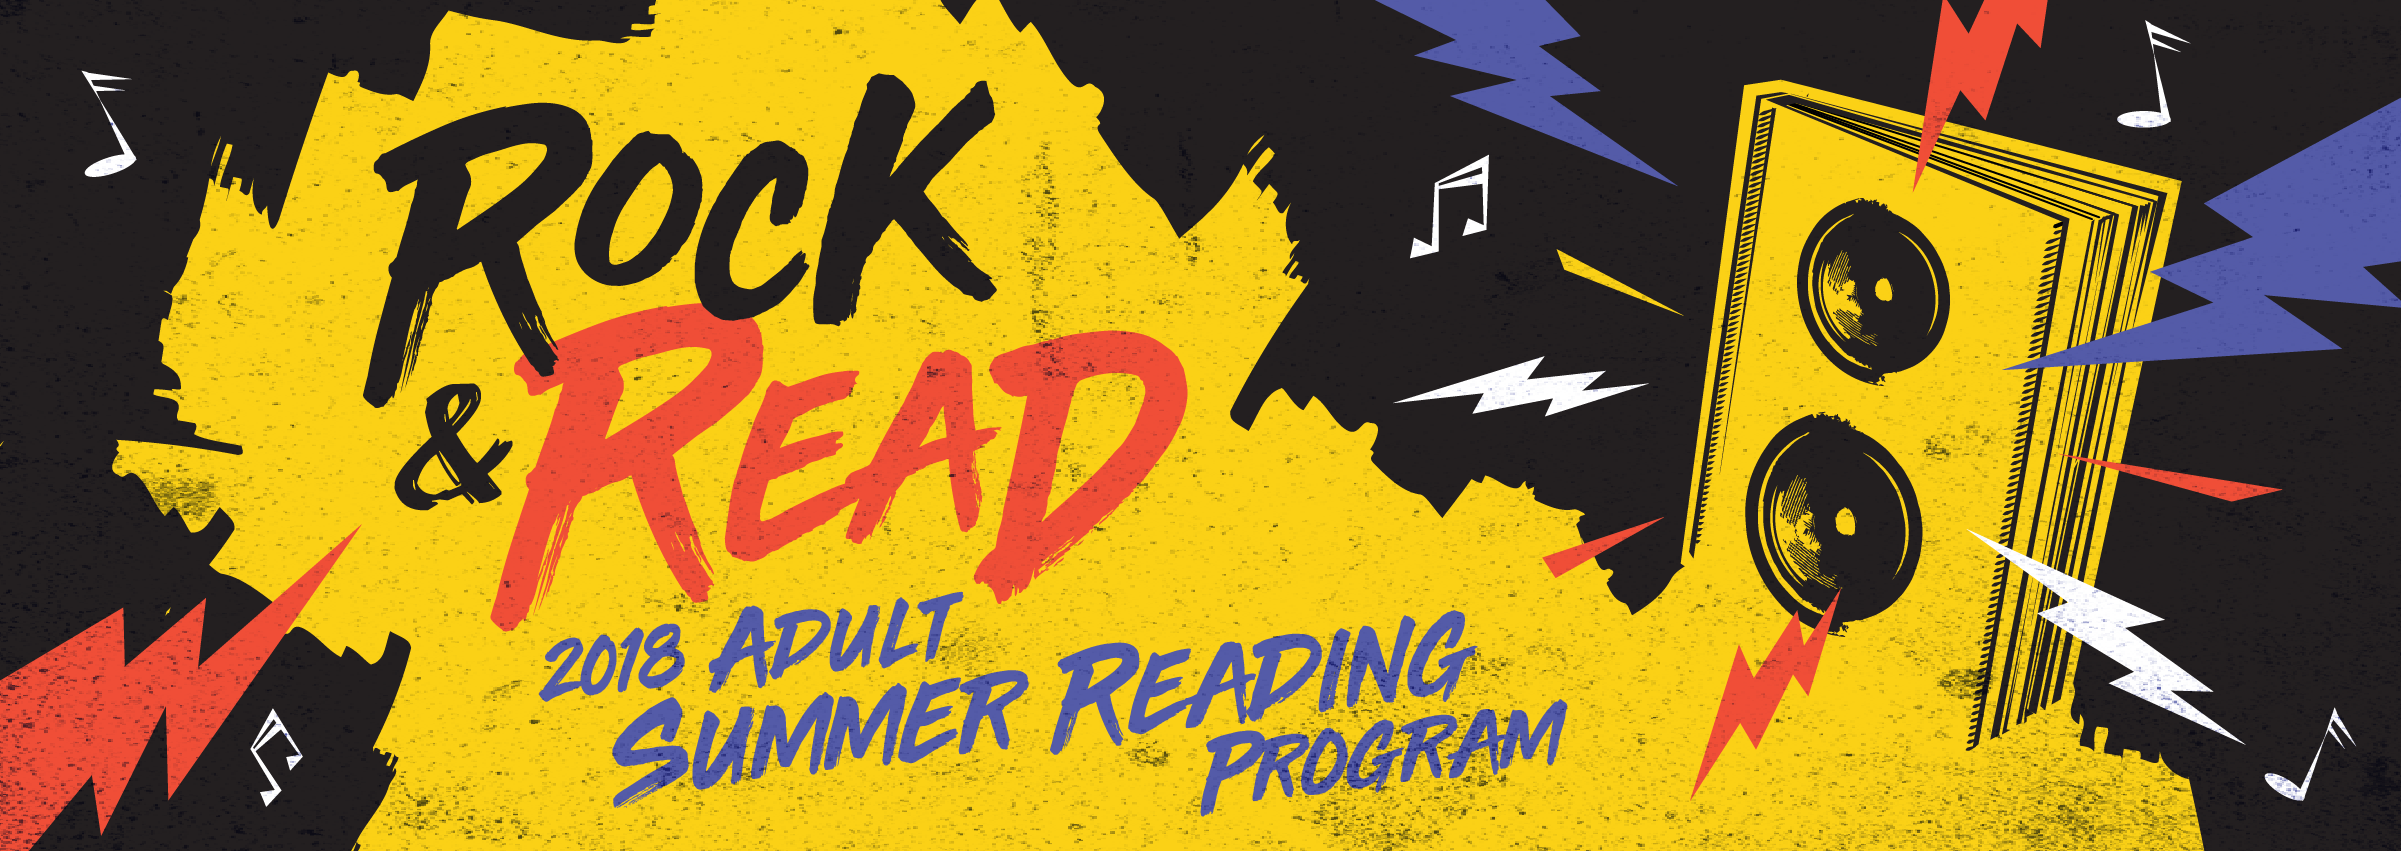 2018 Rock and Read yellow book with speaker